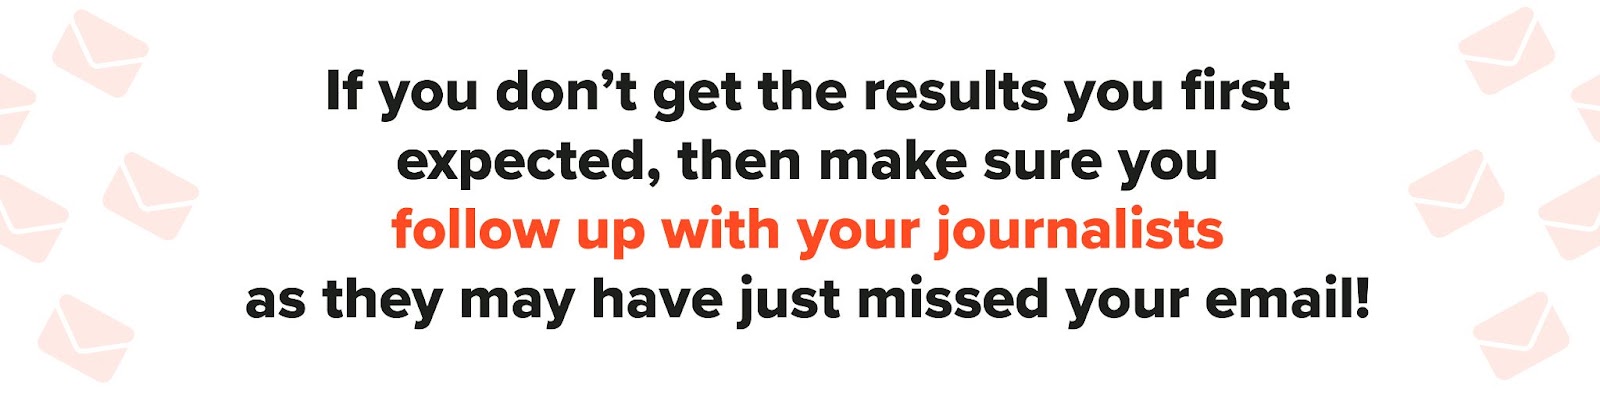 If you don’t get the results you first expected, then make sure you follow up with your journalists, as they may have just missed your email